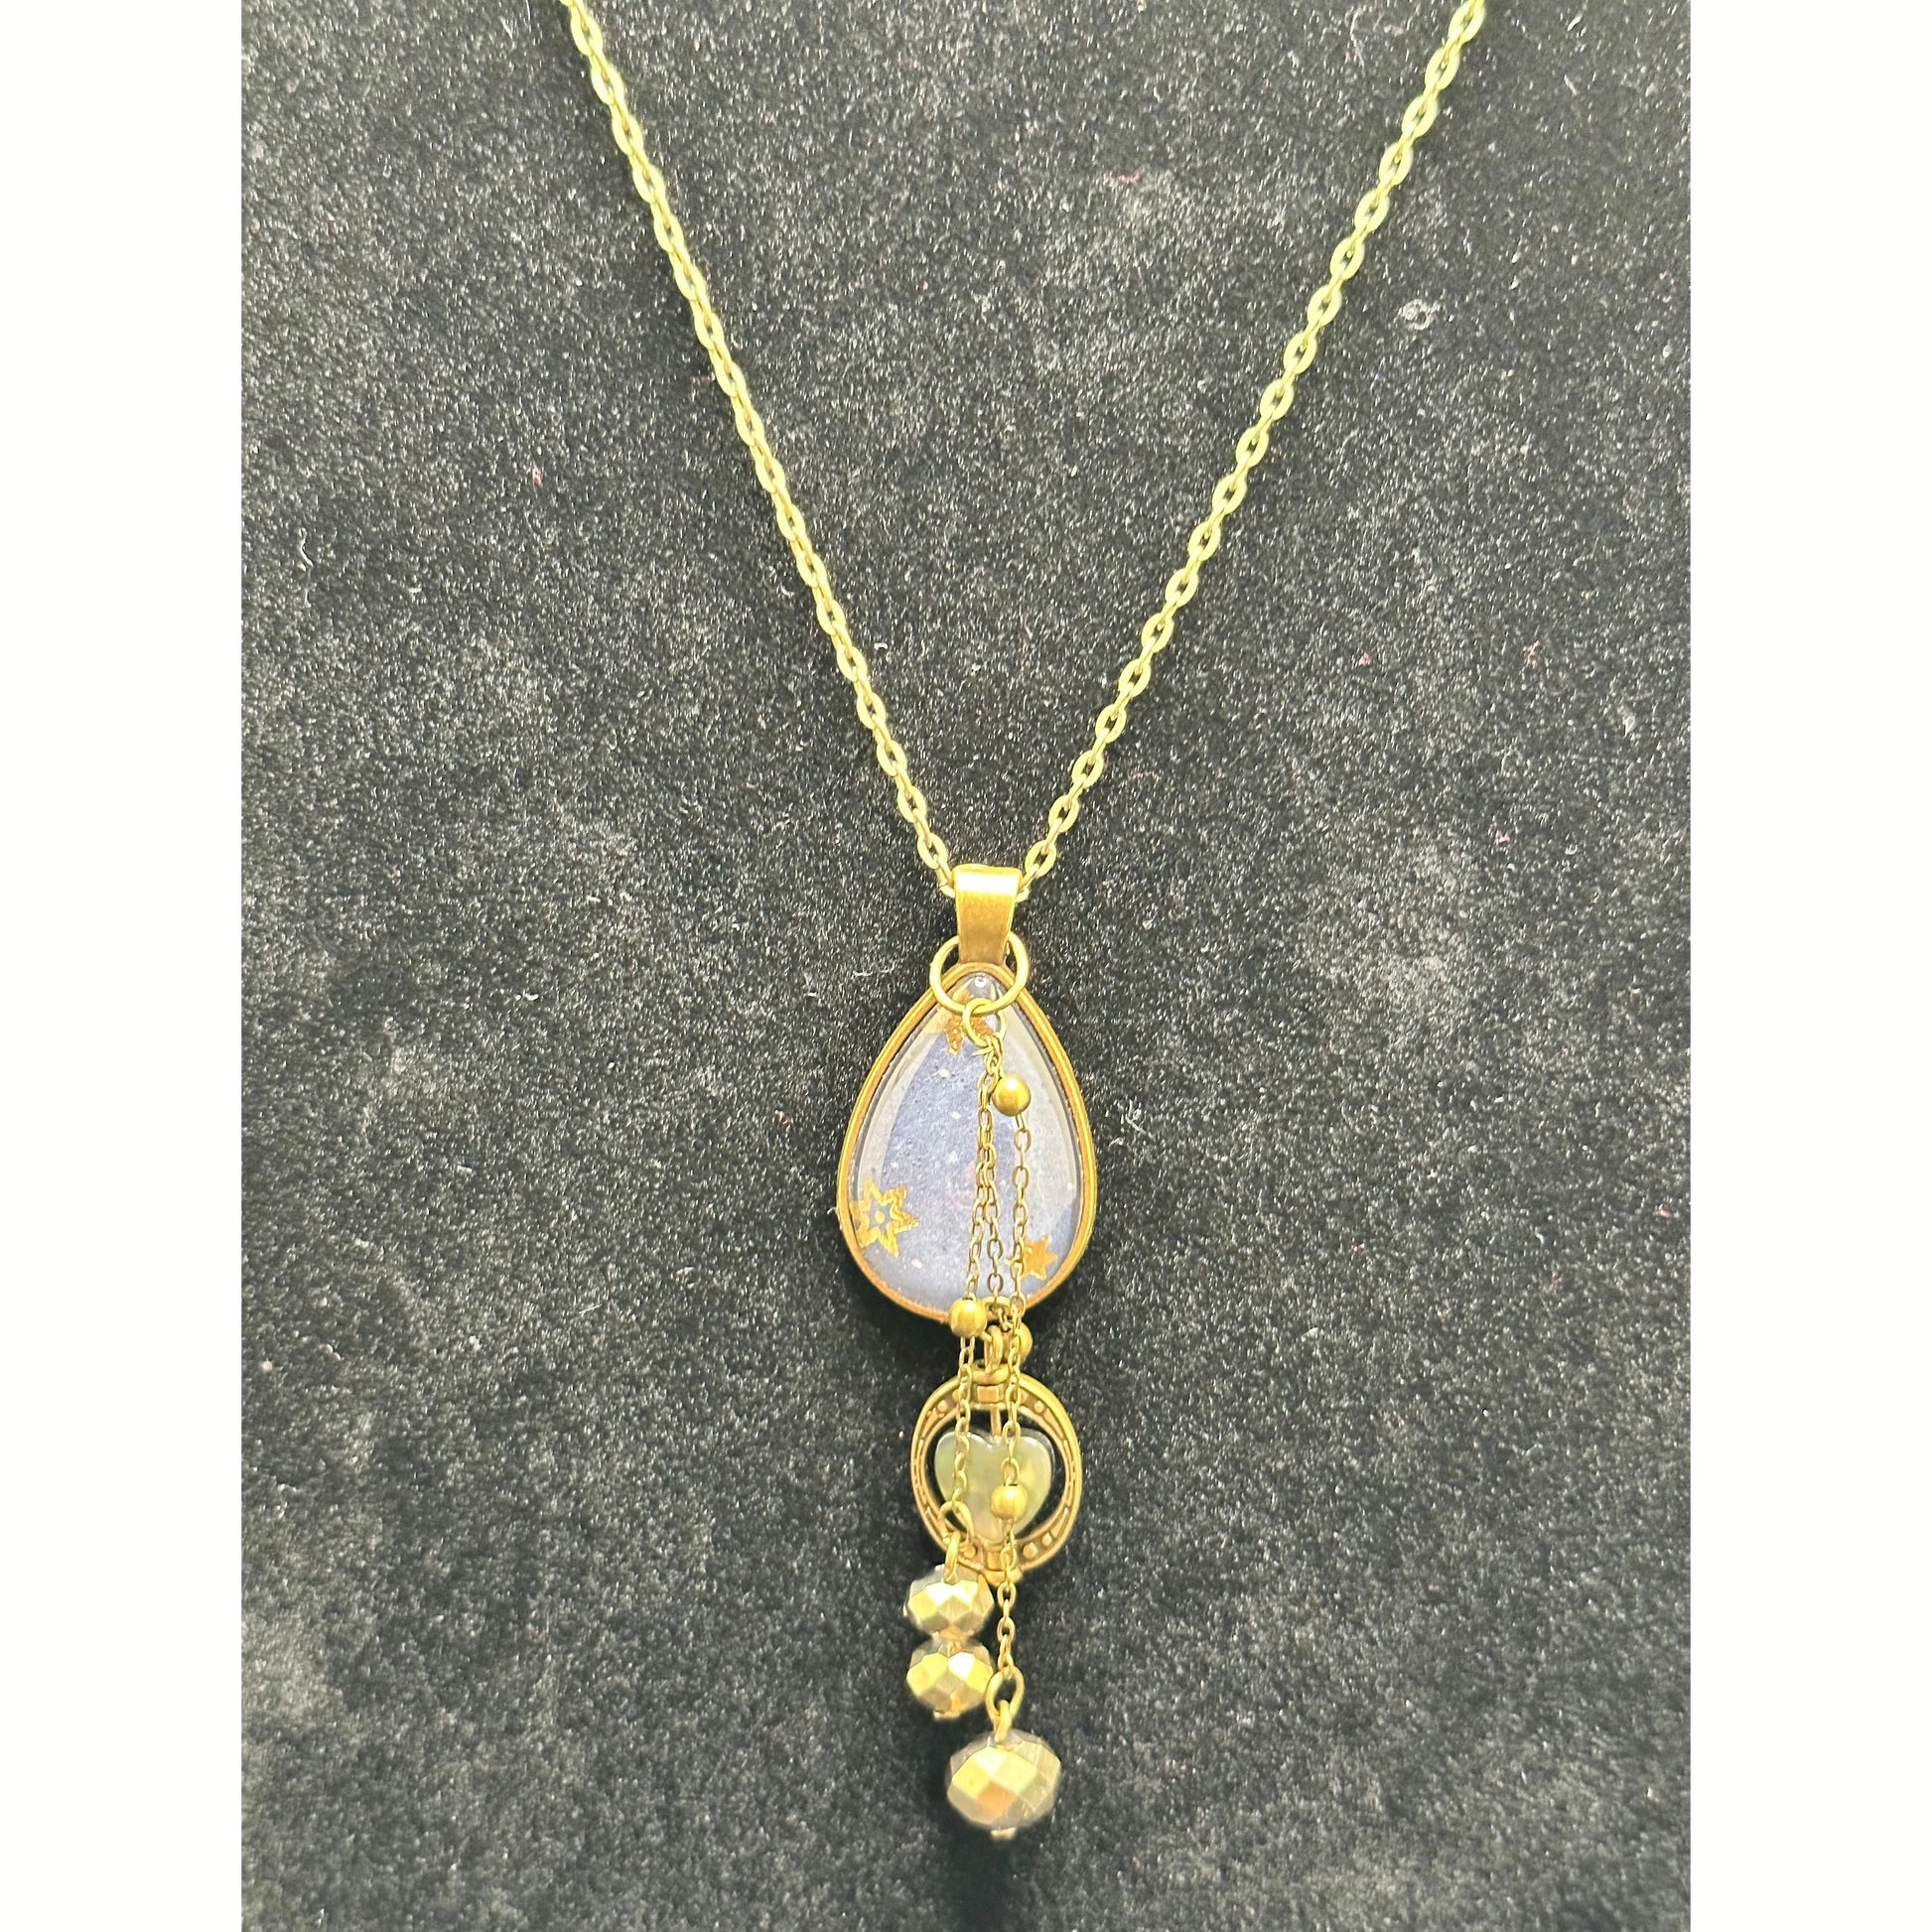 Dewdrop 3 Pendant Necklace - Rhapsody and Renascence